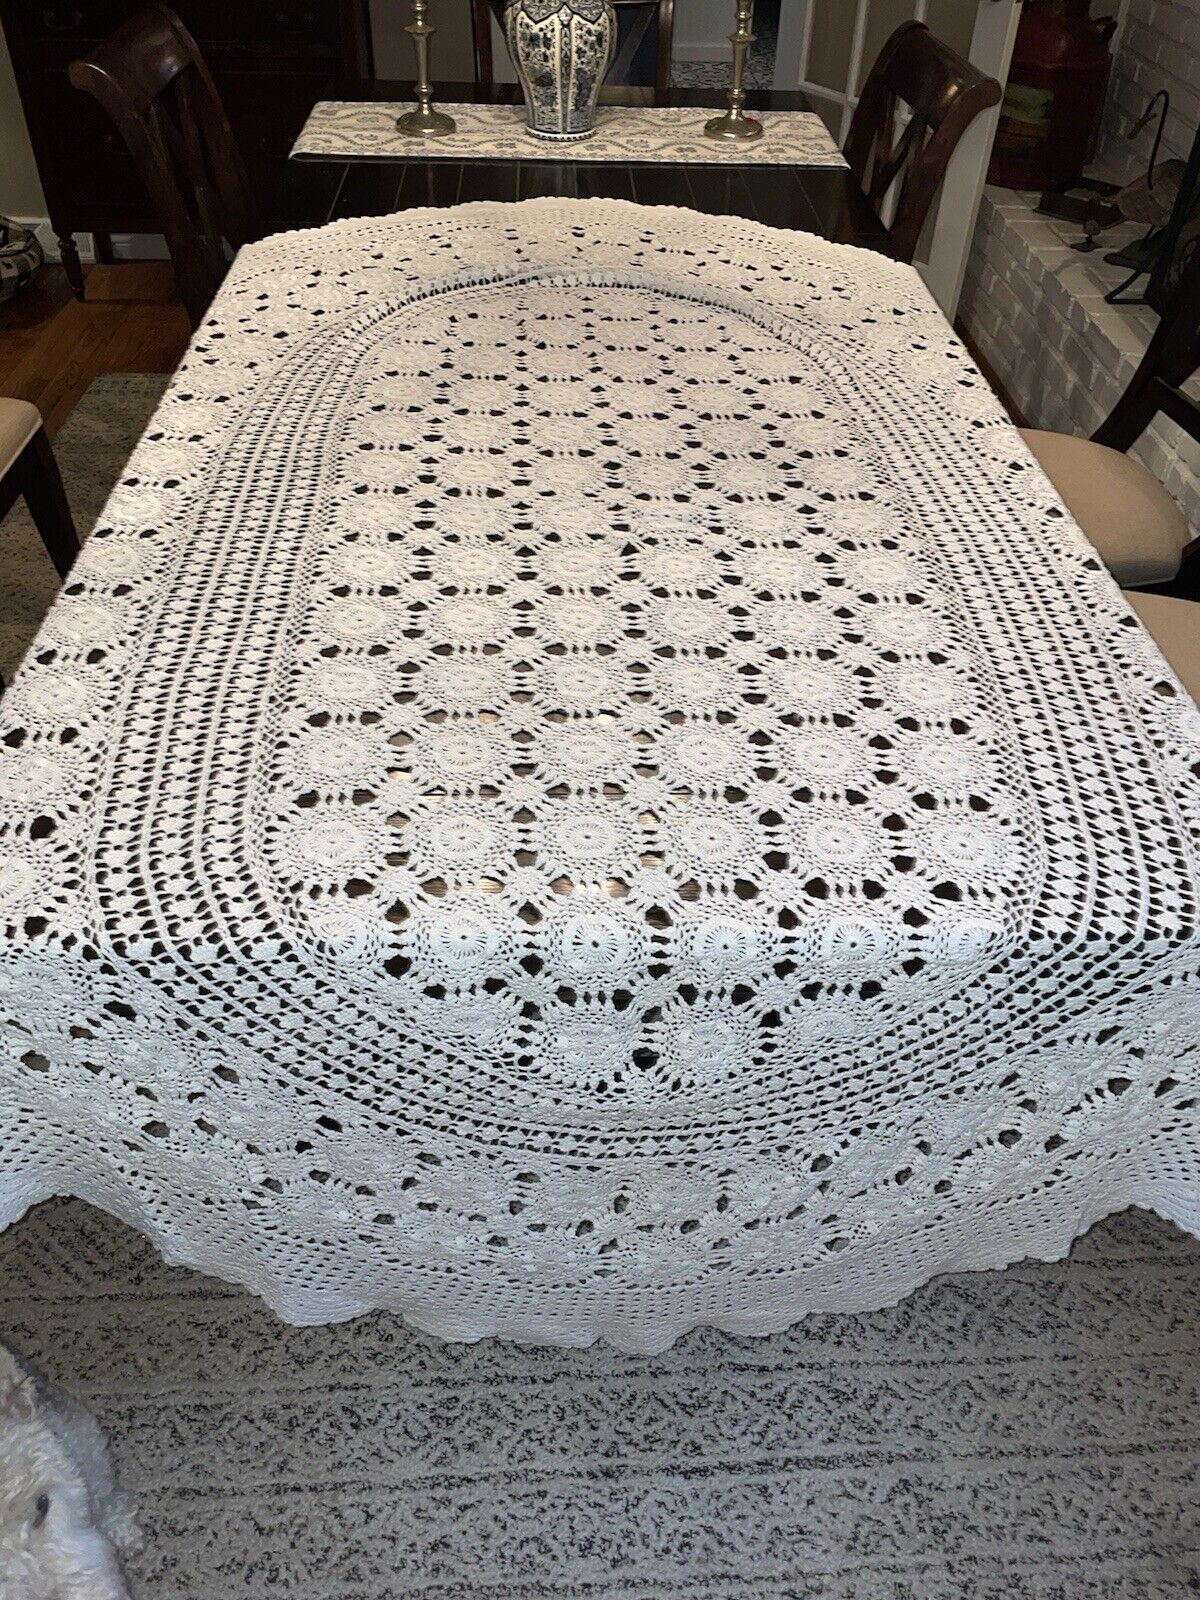 Stunning Oval Shaped CROCHET White TABLECLOTH 60” X 90”